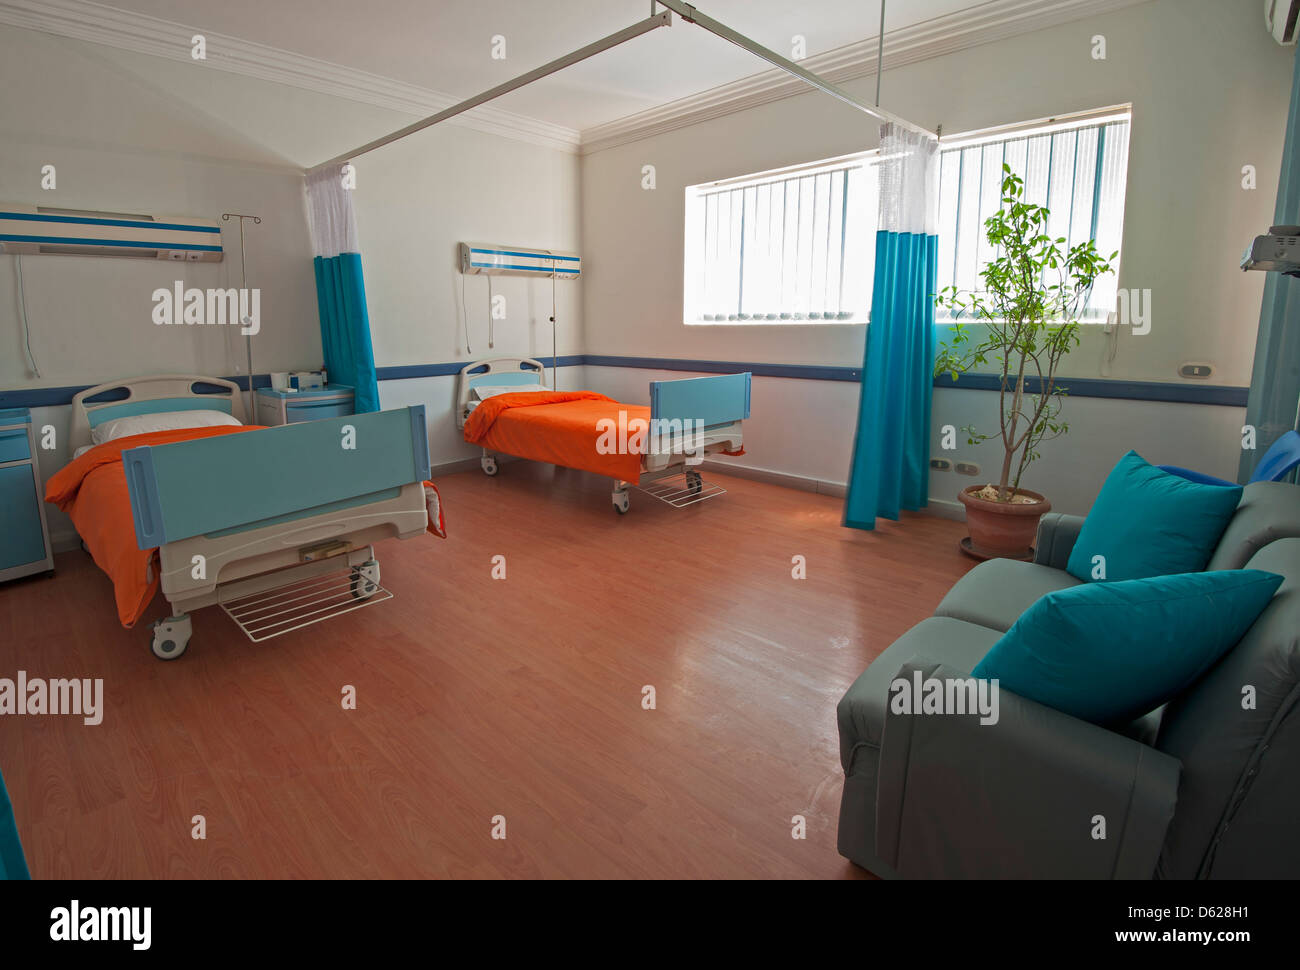 Hospital beds in a private hospital ward ward with plant and sofa Stock Photo